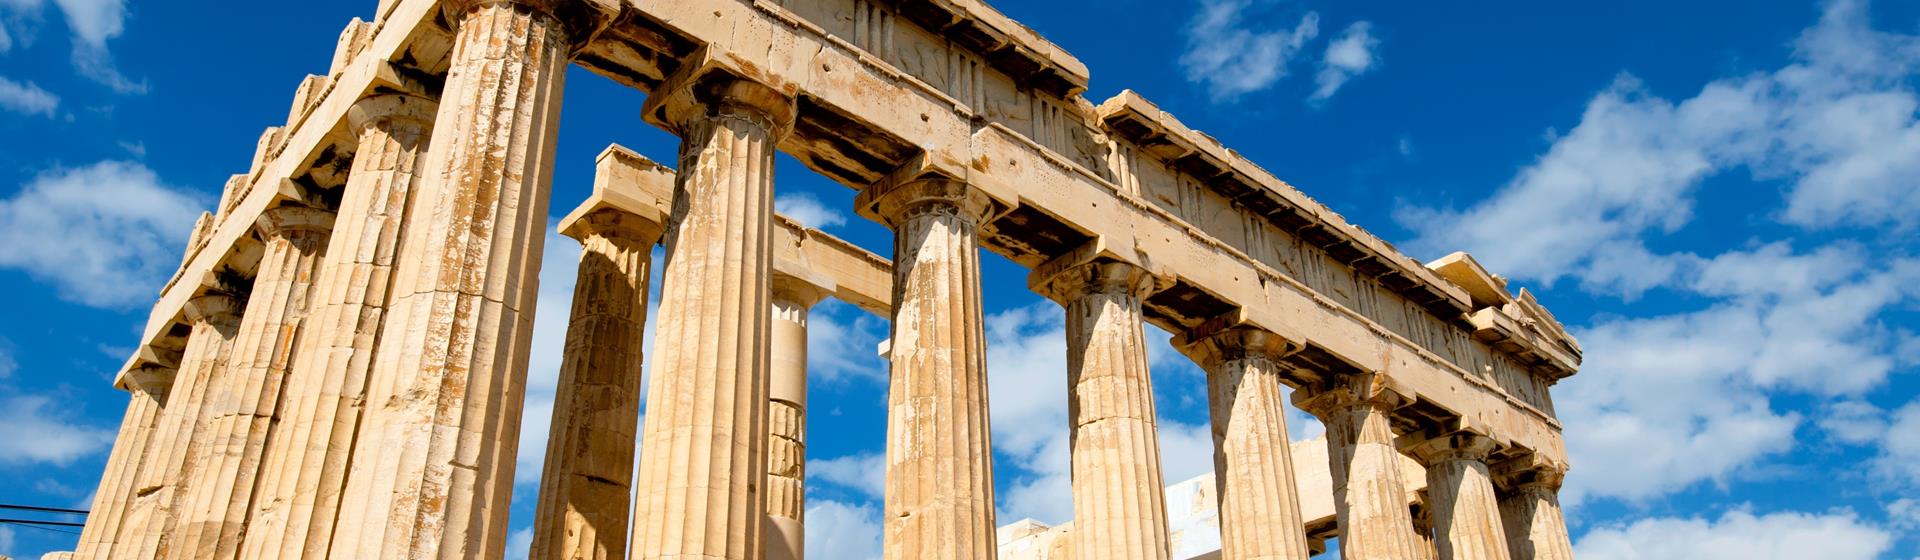 Holidays & City Breaks to Athens